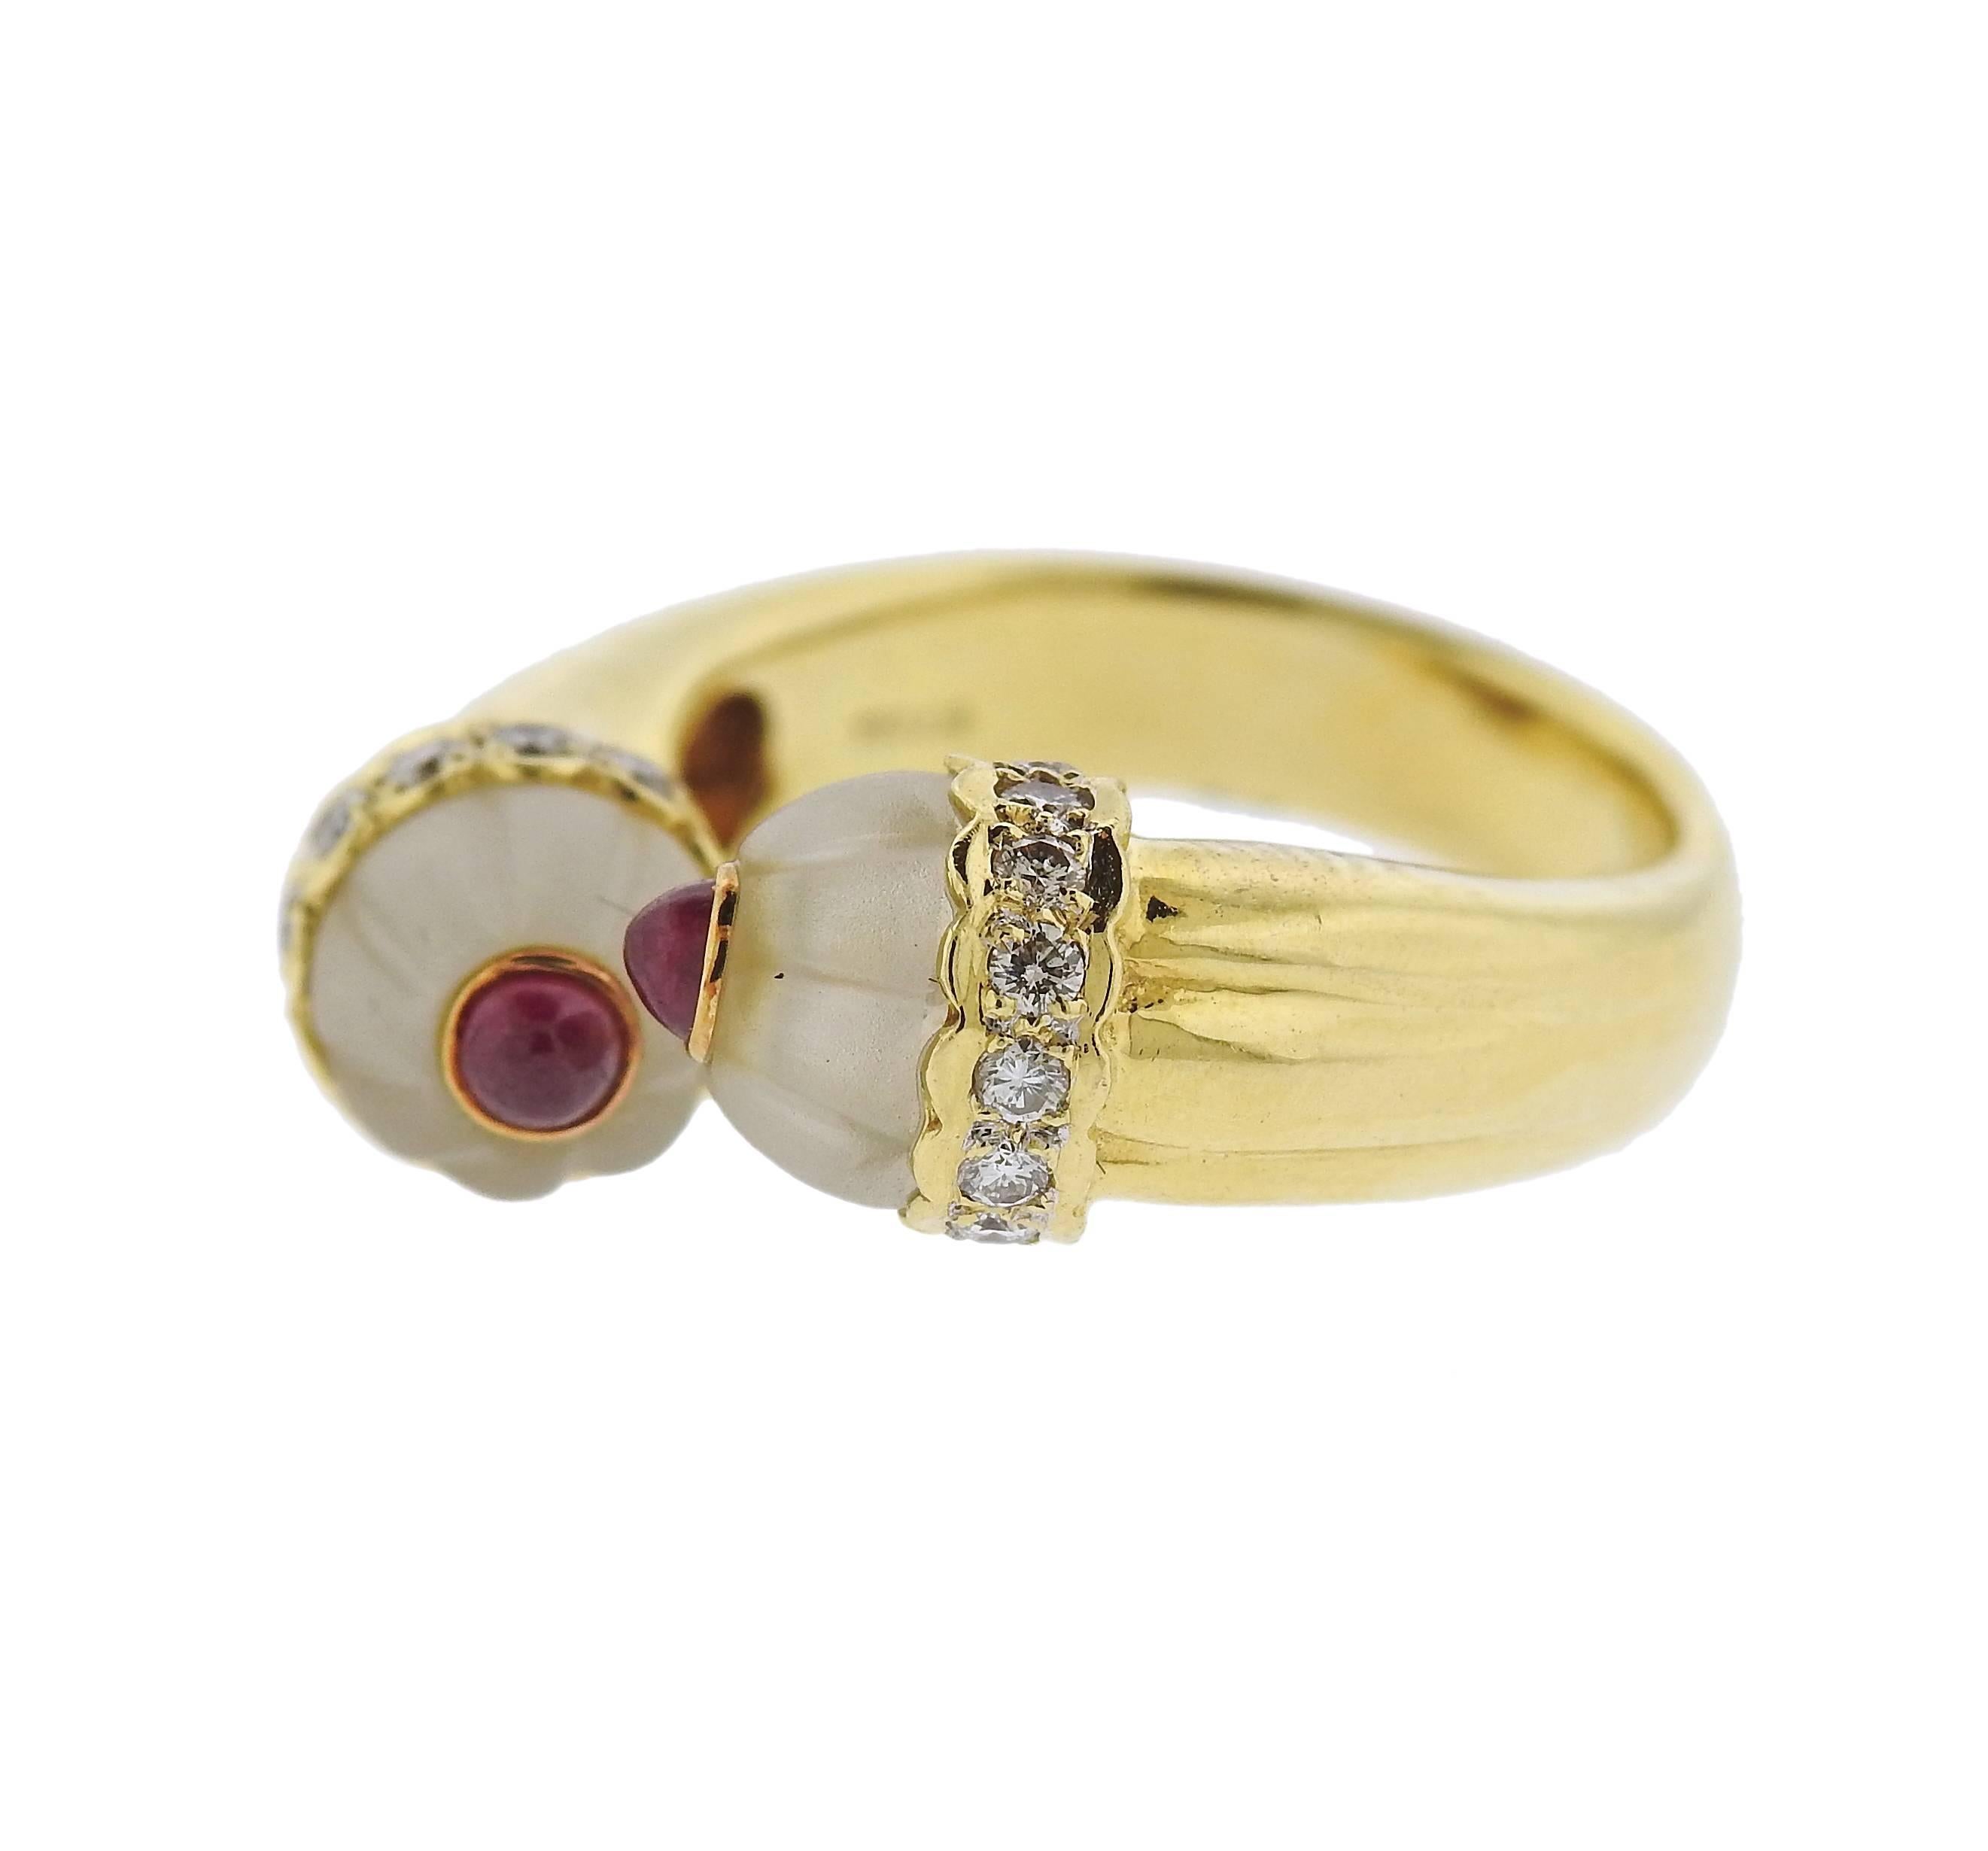 An 18k yellow gold bypass ring, set with carved frosted crystal, ruby cabochons and 0.30ctw in diamonds. Ring size 6, ring top is 8mm wide, weight - 9.1 grams. Marked: 750 18k, D030, 027.